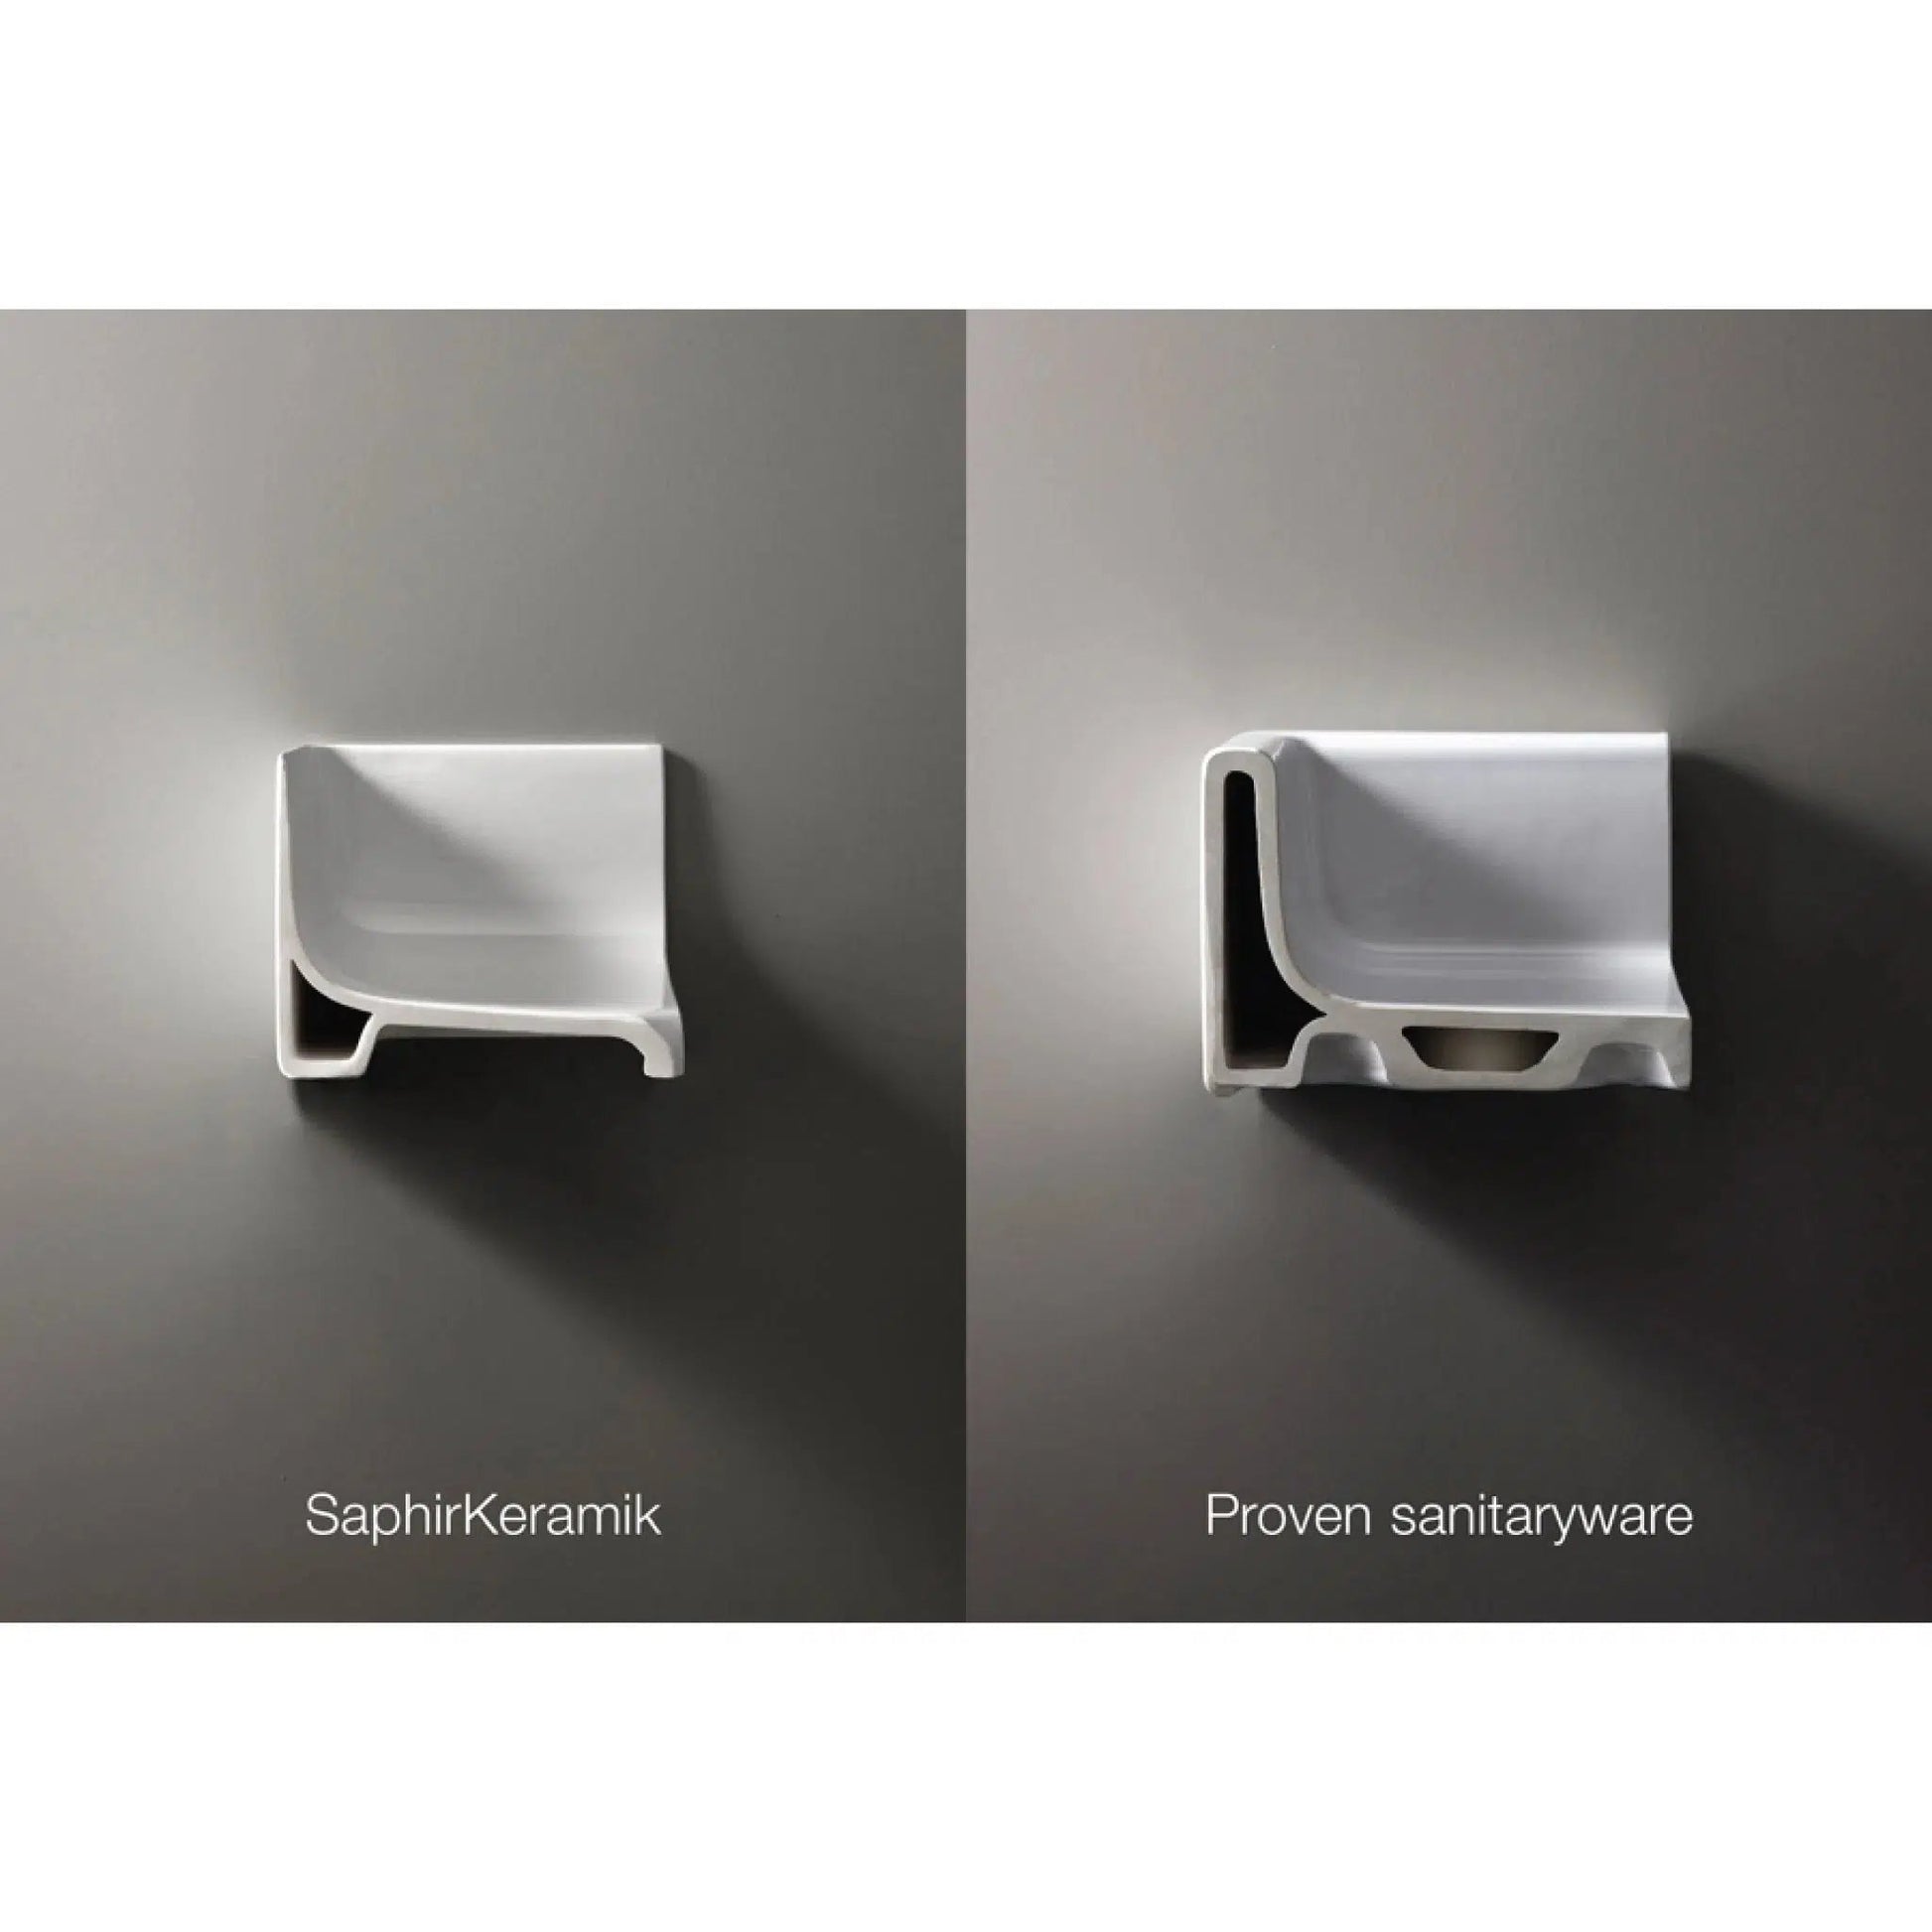 Laufen Sonar 24" White Ceramic Wall-Mounted Bathroom Sink With 3 Faucet Holes